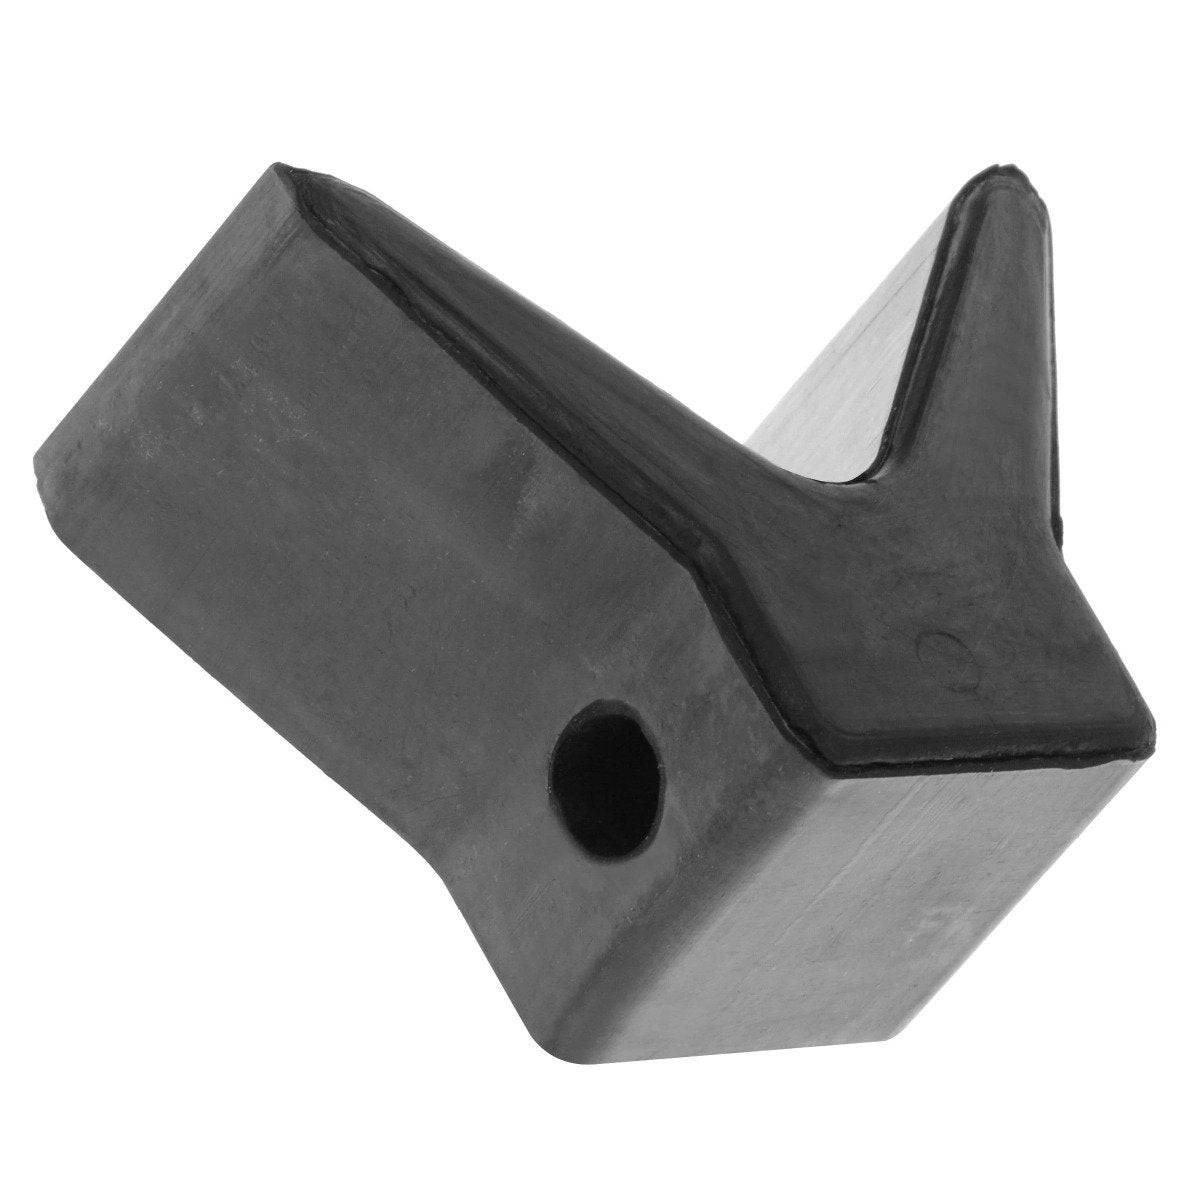 Boating Essentials - Rubber Bow Stop - BE-TR-59500-DP